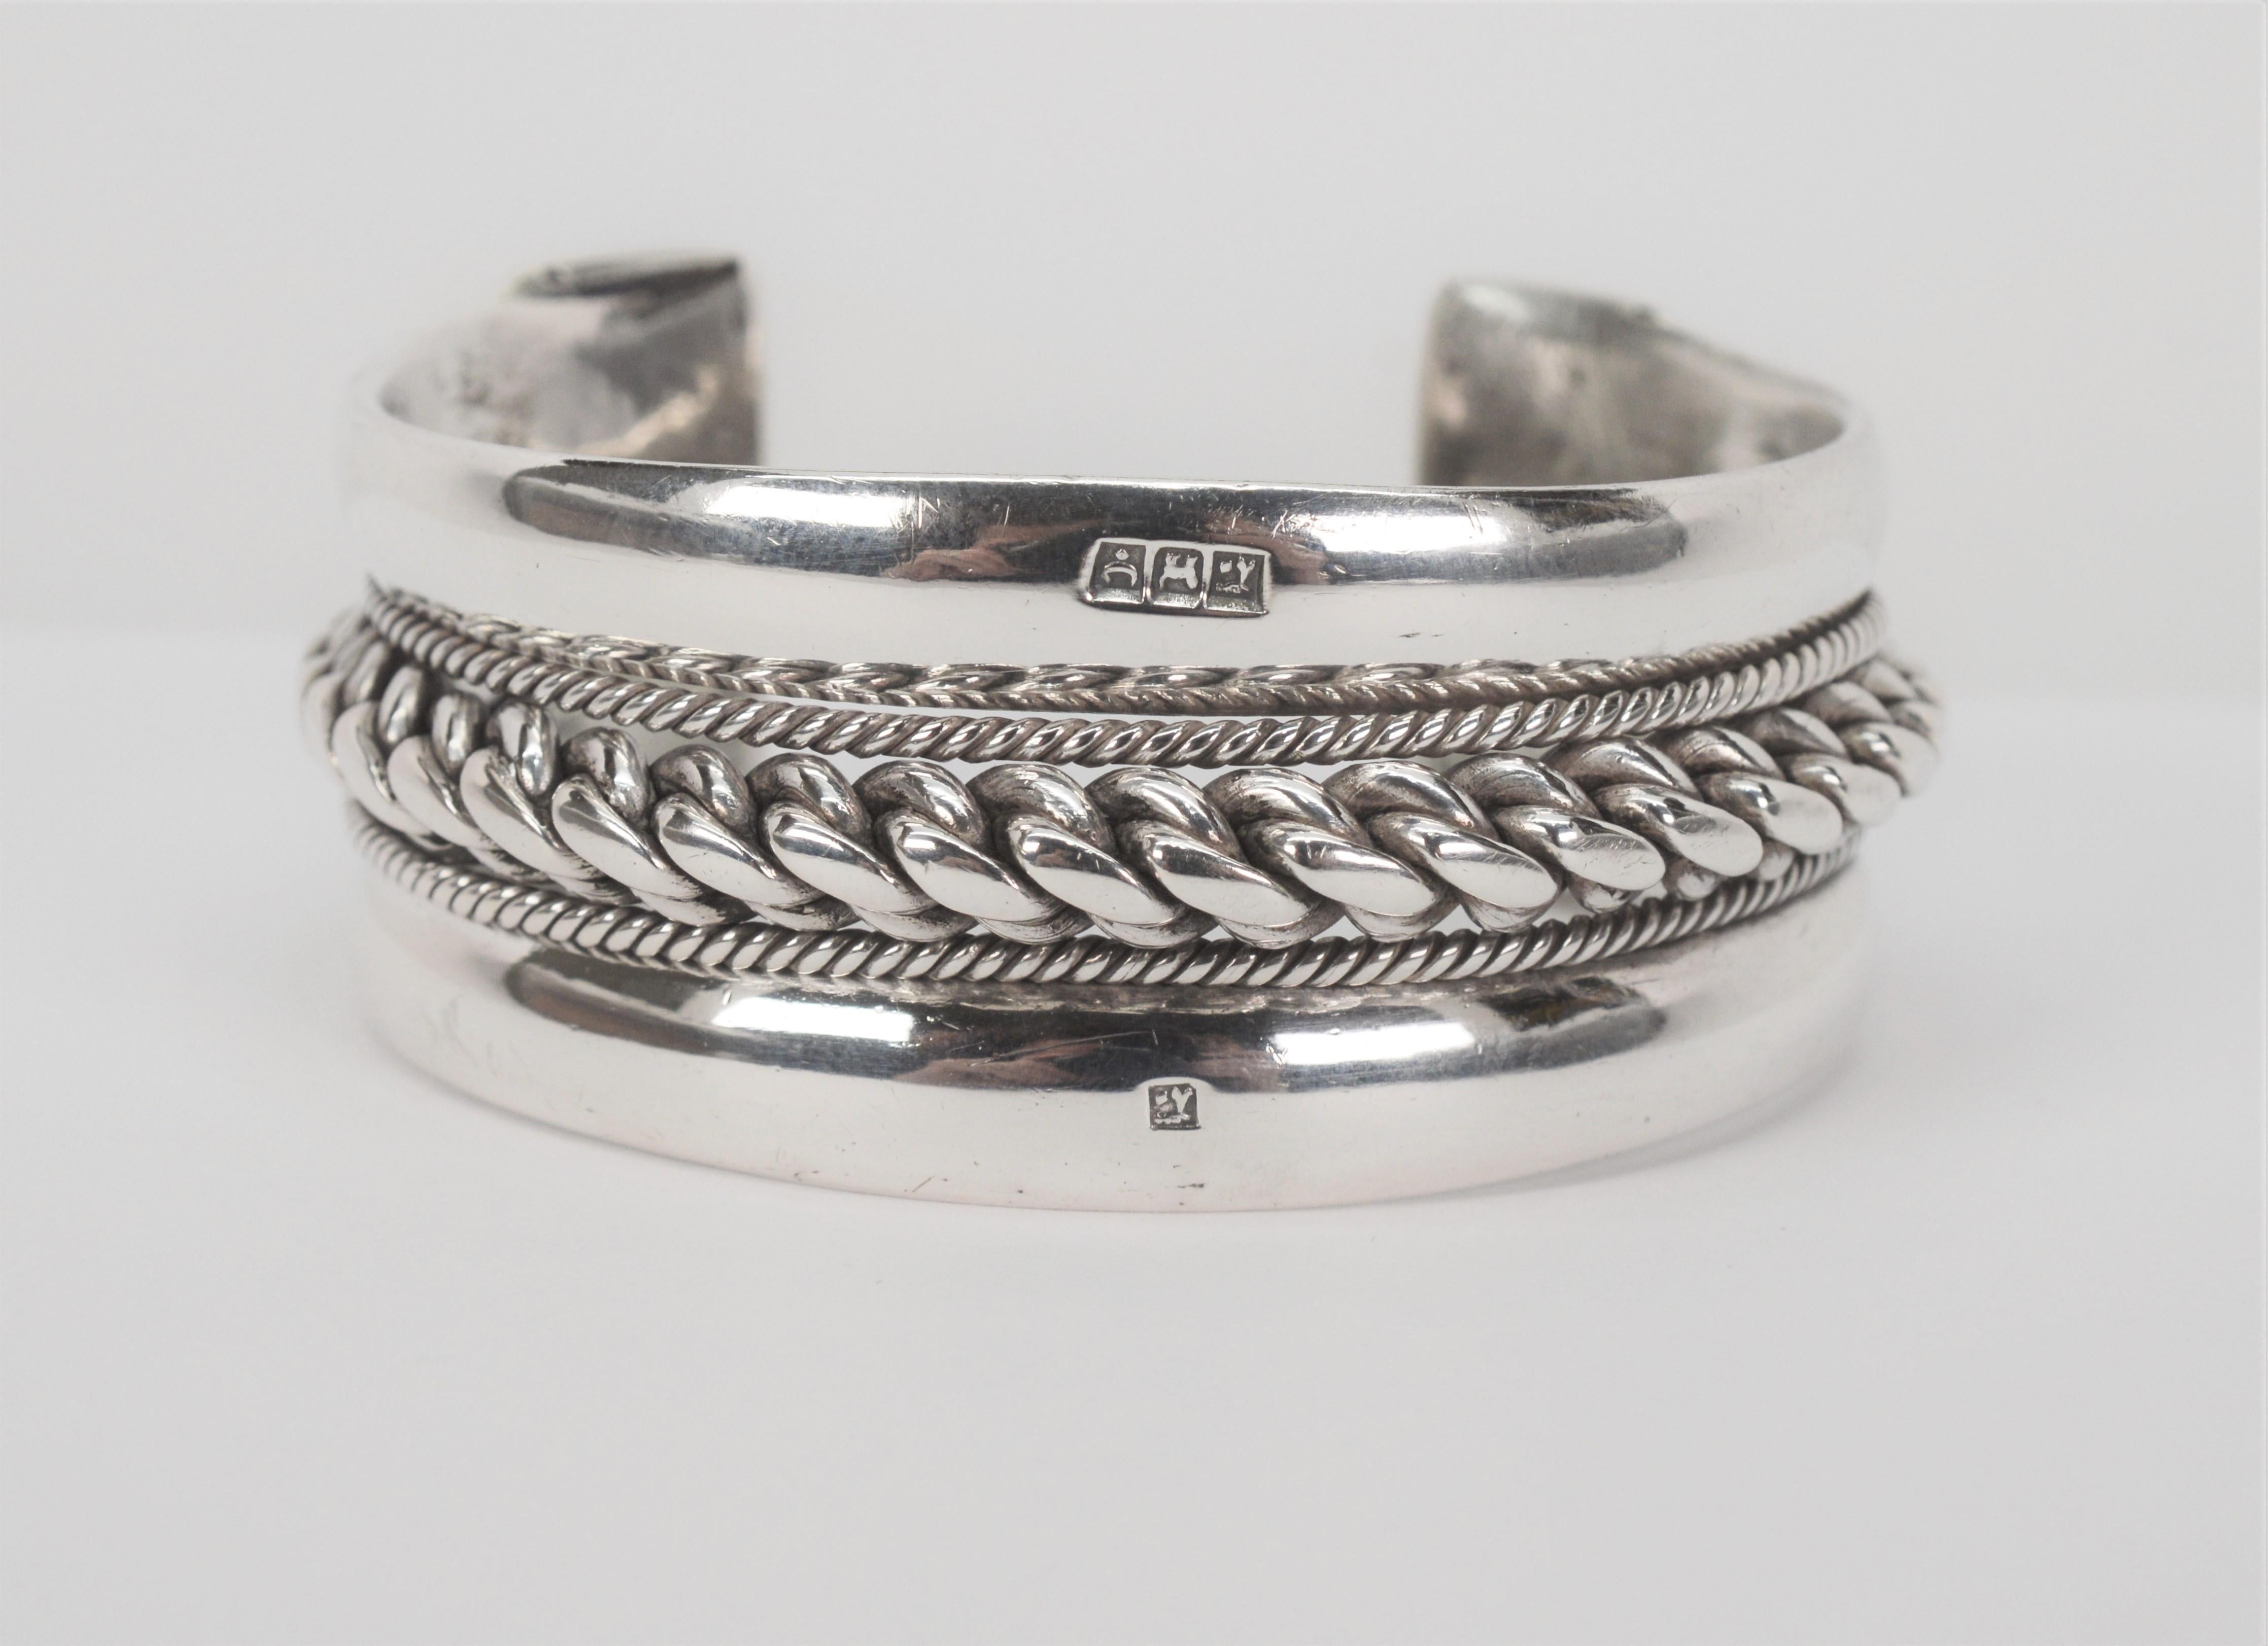 Notably well hand crafted heavy gauge .925 Sterling Silver Cuff Bracelet with Egyptian artisan hallmarks. A bold raised twisted rope detail dominates and is accented with smaller braided trim all hand crafted in sterling silver. The outer rim of the